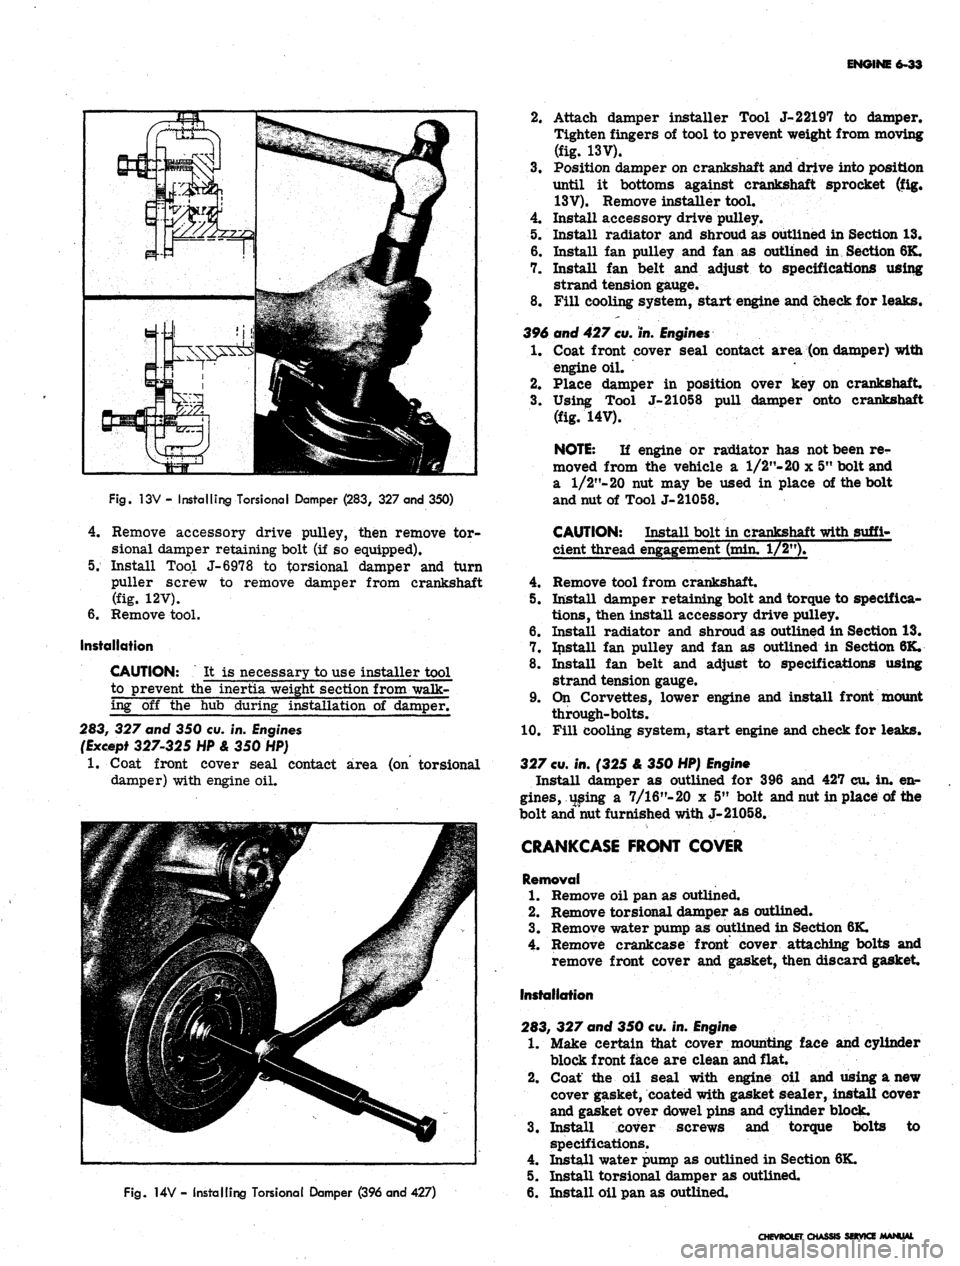 CHEVROLET CAMARO 1967 1.G Chassis Workshop Manual 
ENGINE 6-33

Fig.
 13V - Installing TorsionaI Damper (283, 327 and 350)

4.
 Remove accessory drive pulley, then remove tor-

sional damper retaining bolt (if so equipped).

5. Install Tool J-6978 to